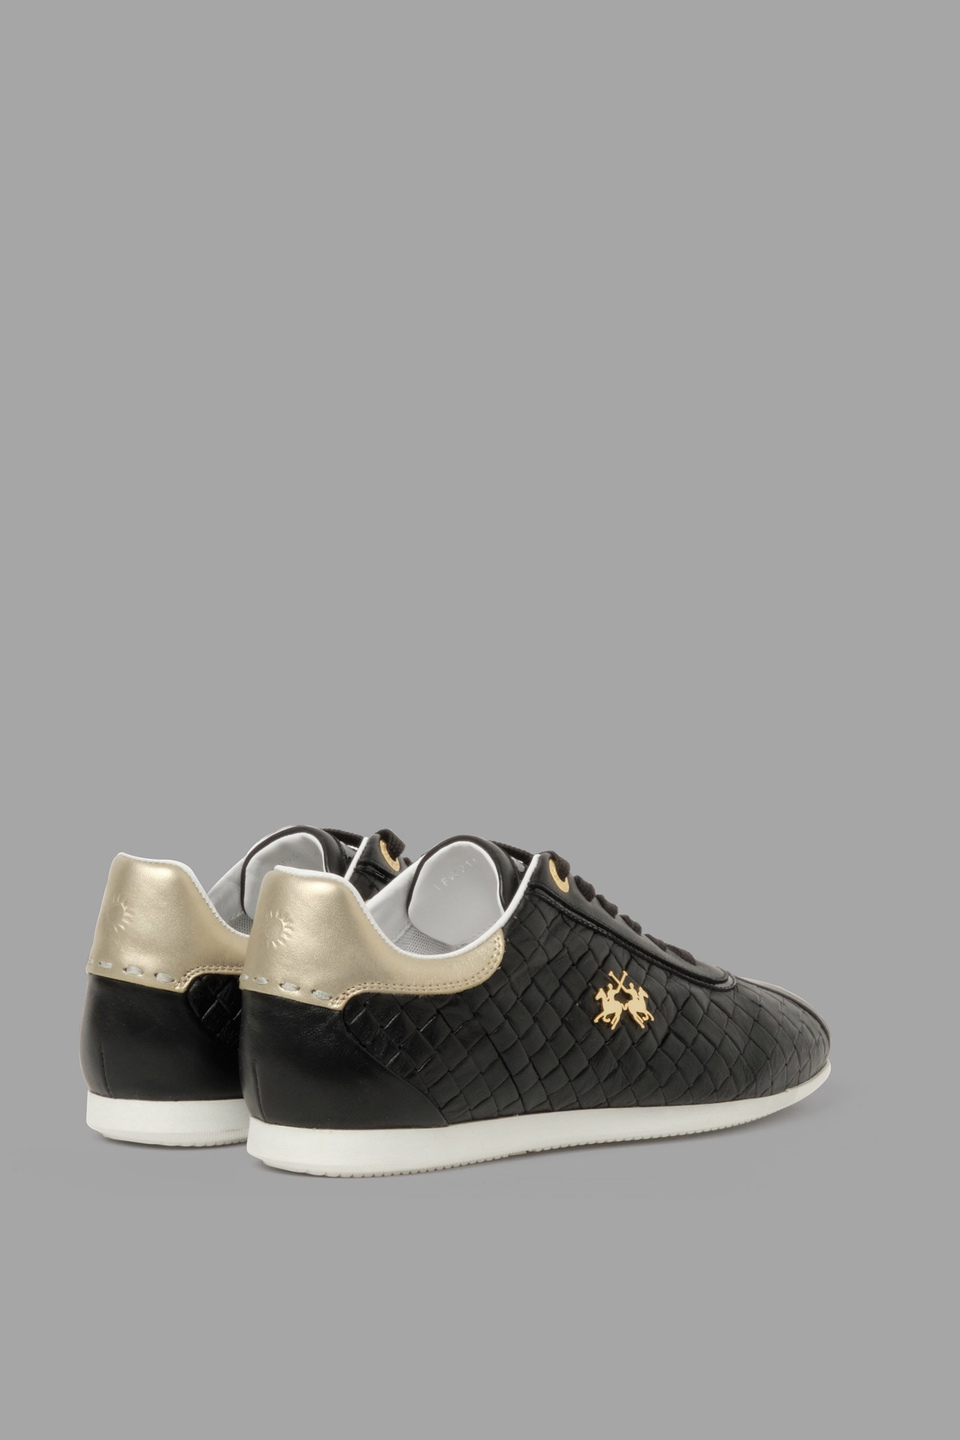 Woven leather sneakers | La Martina - Official Online Shop